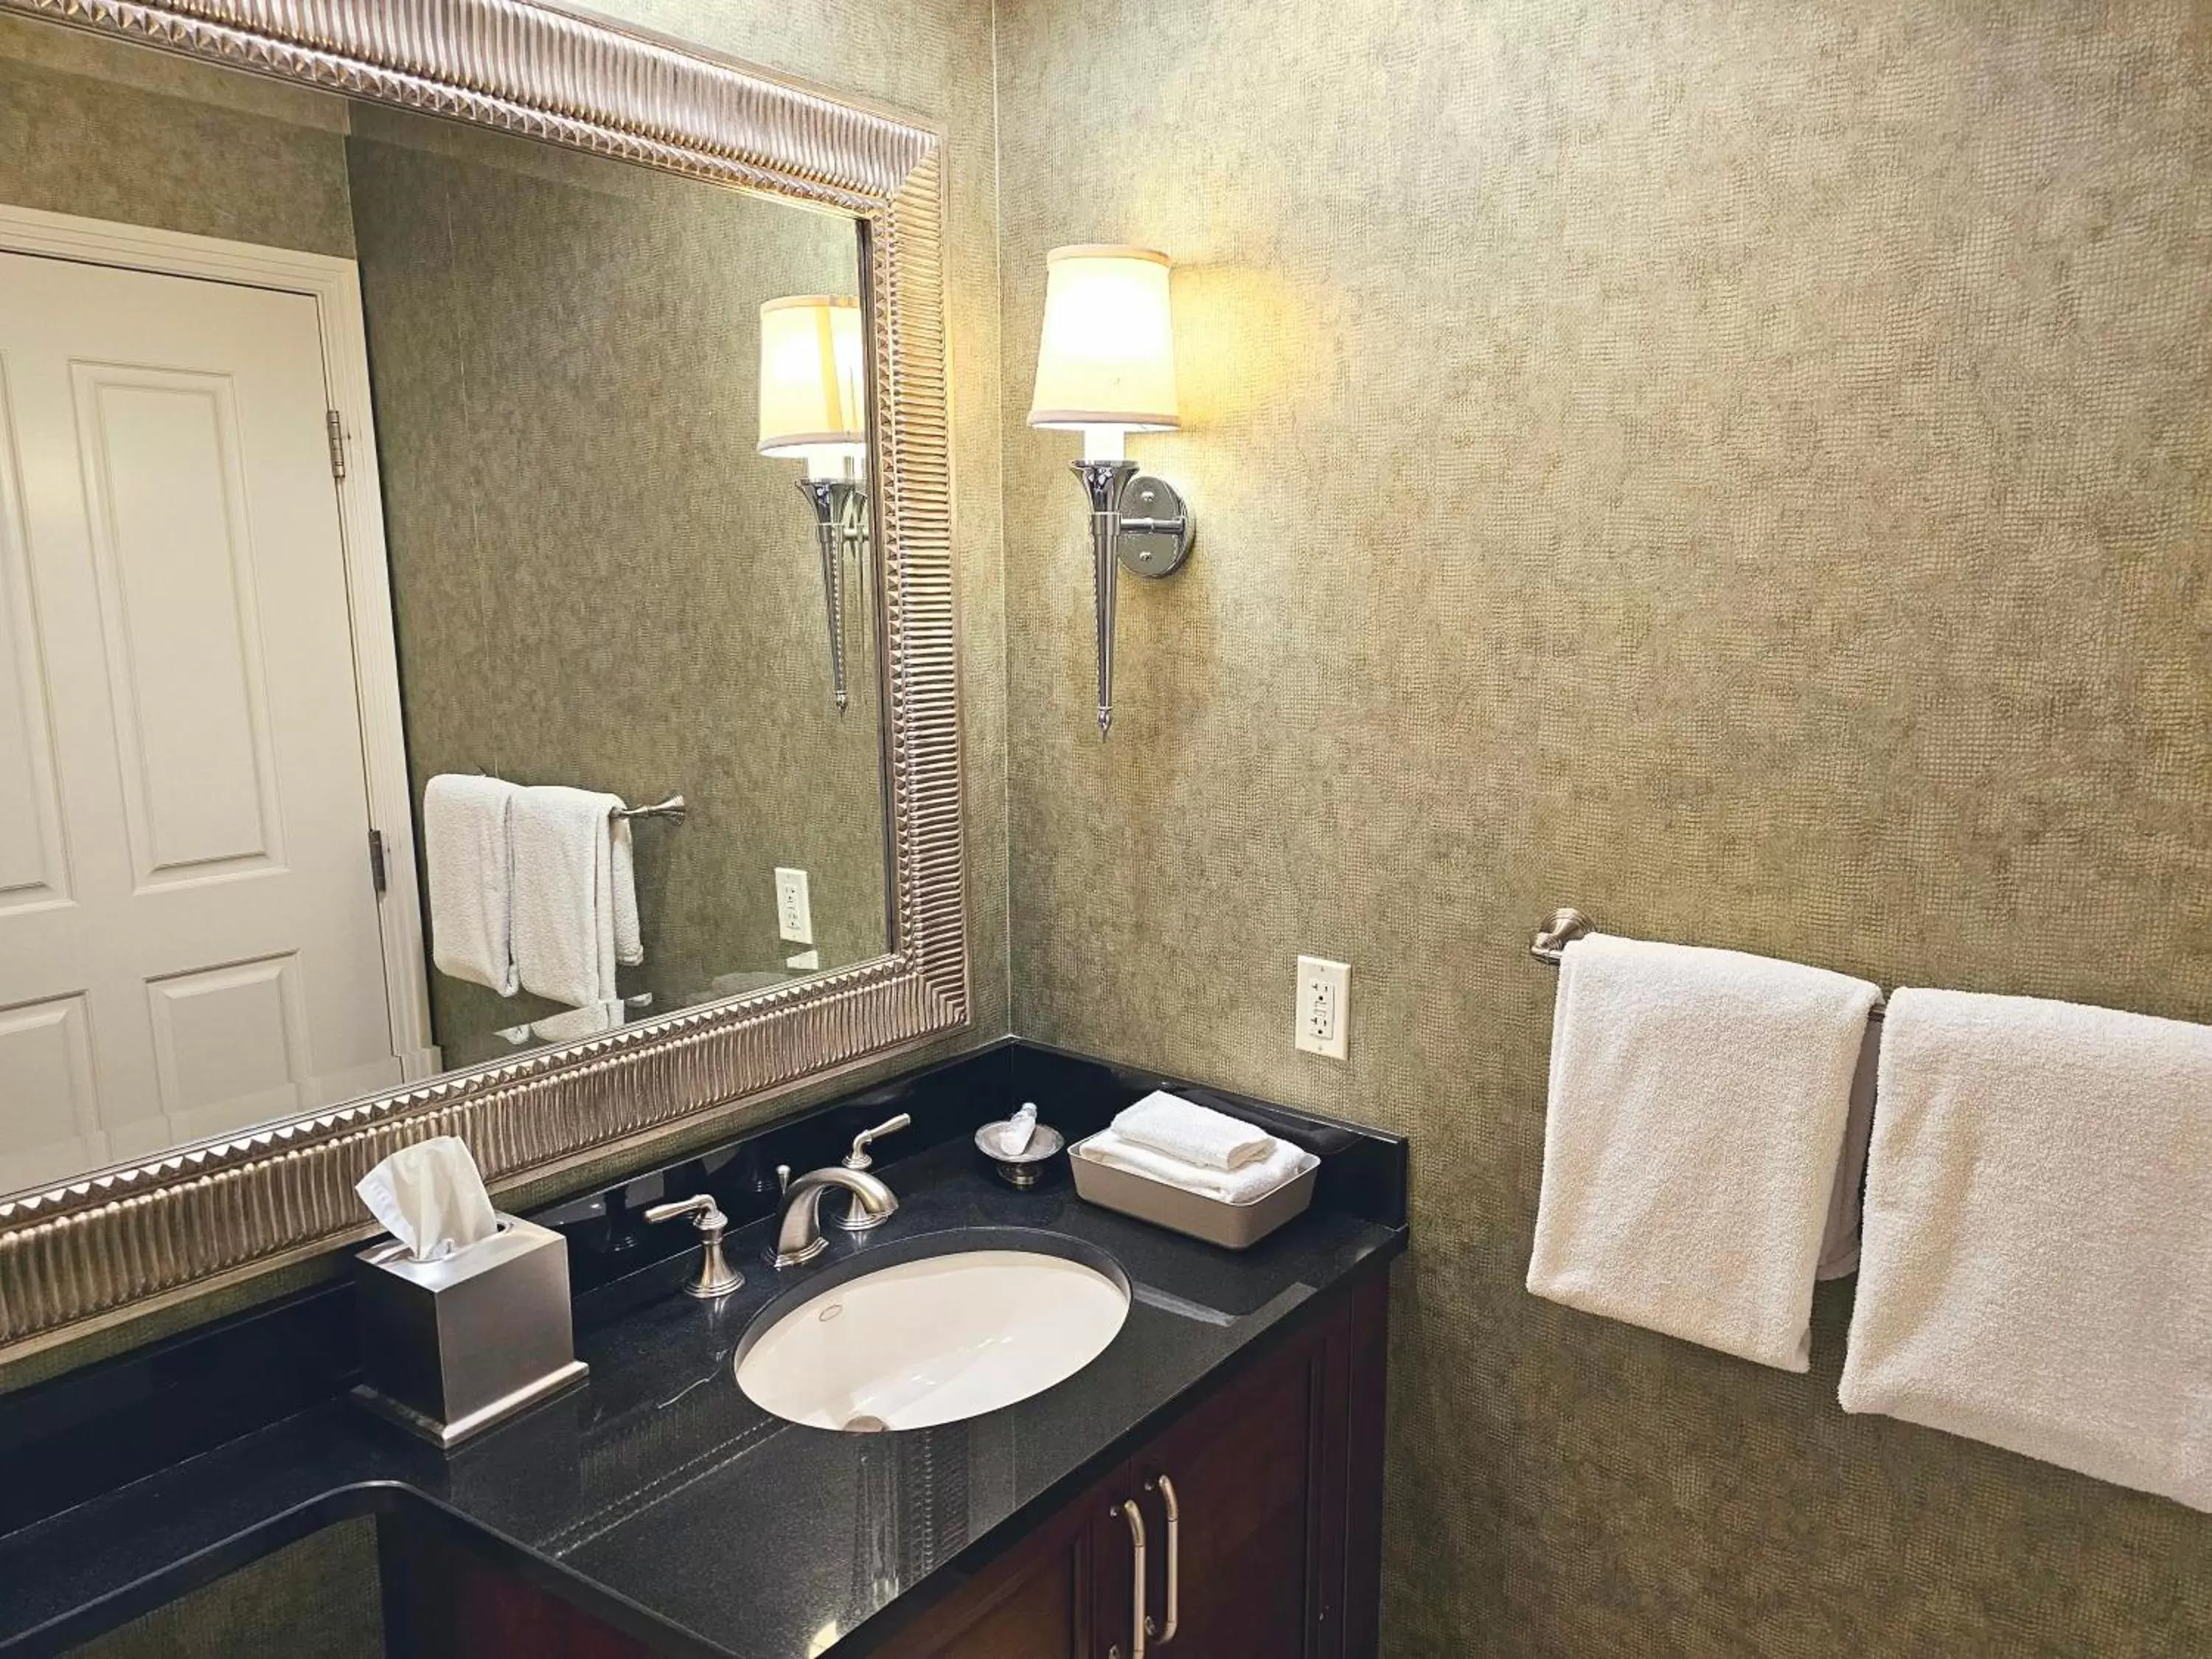 Bathroom in MGM Signature Strip view balcony full kitchen - 1 Br suite 2 full bath - F1 track view